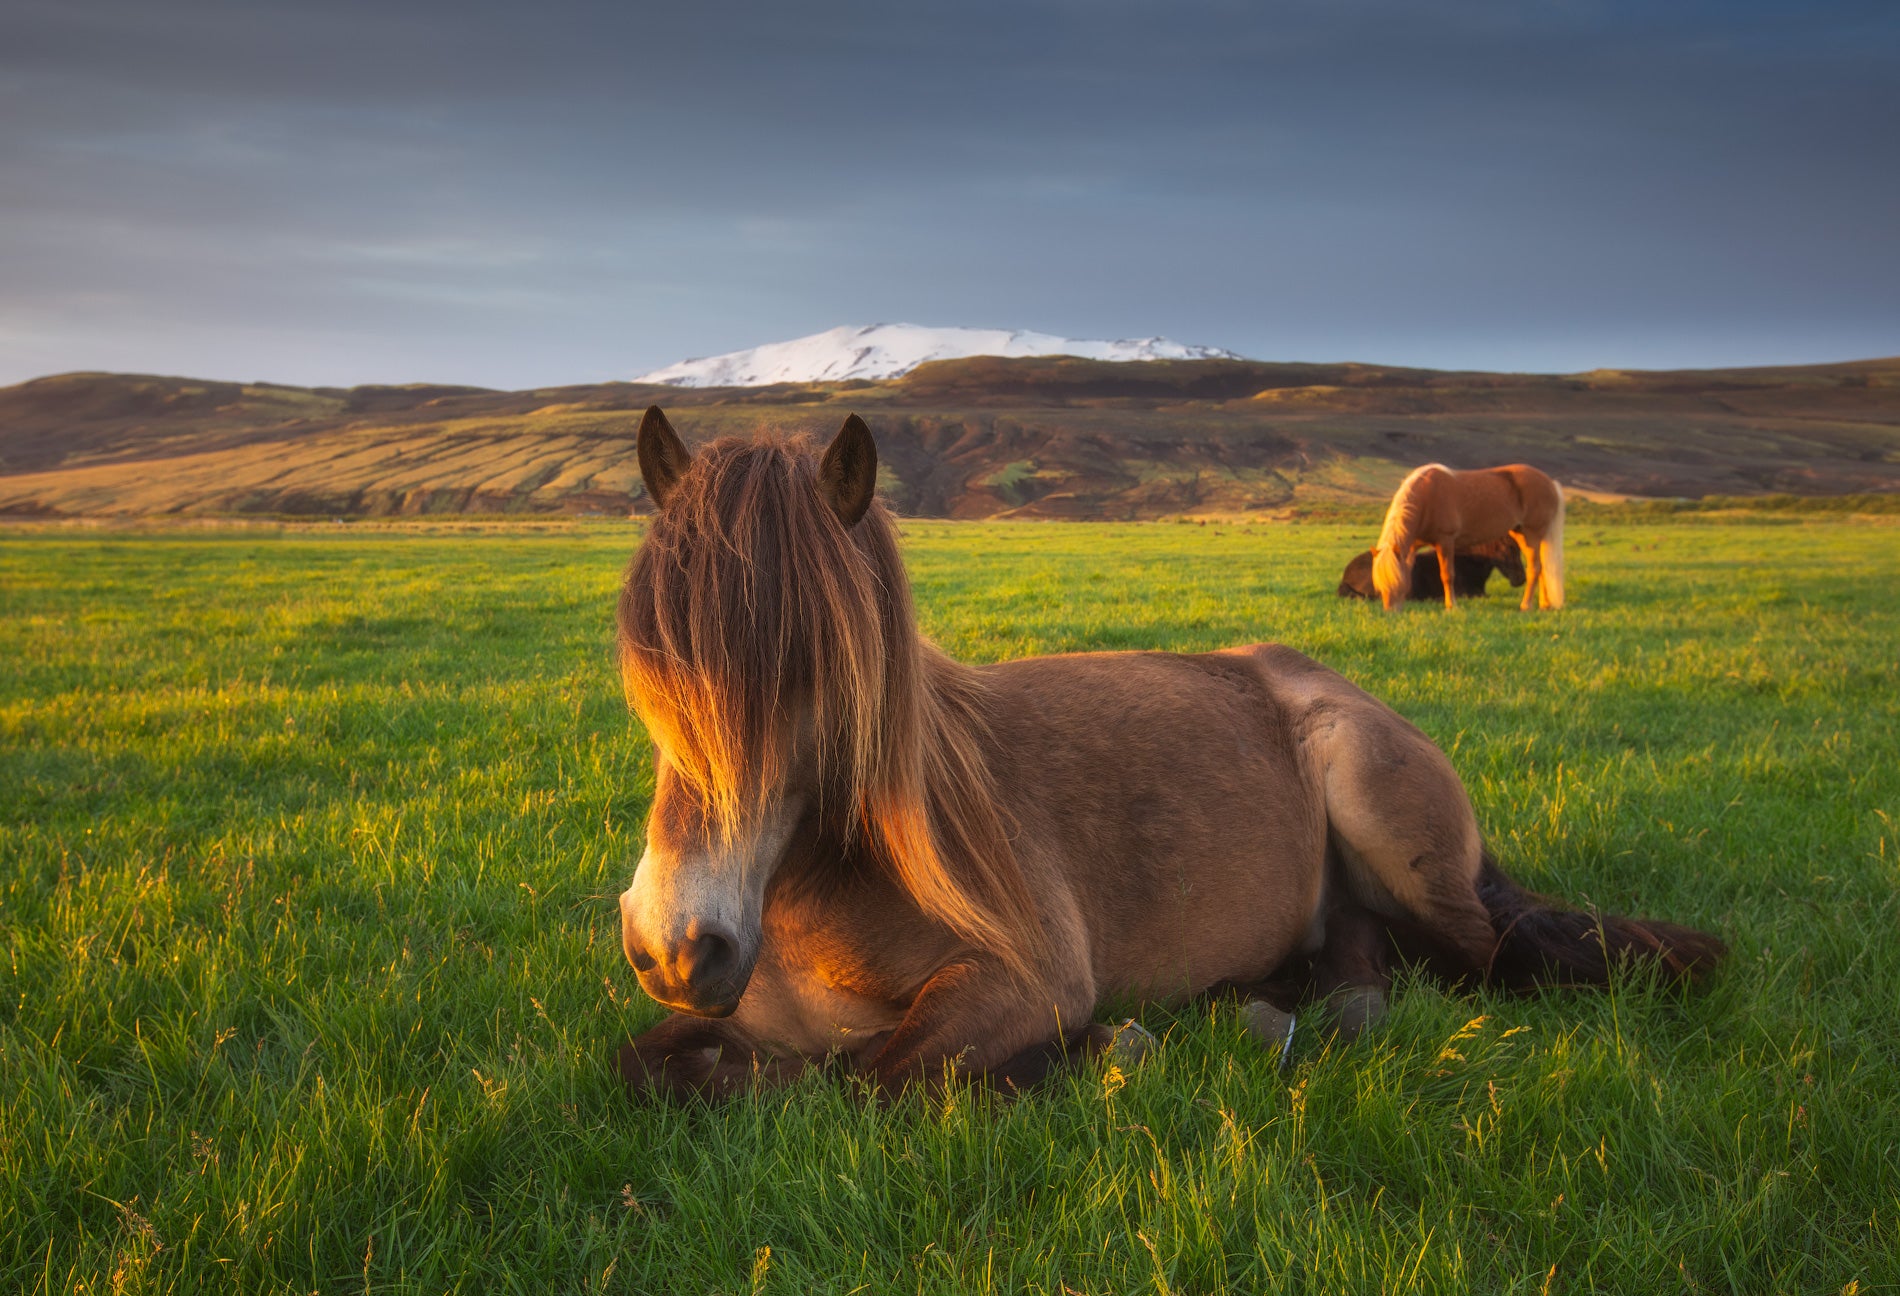 The Horse of Hekla featured opacity image